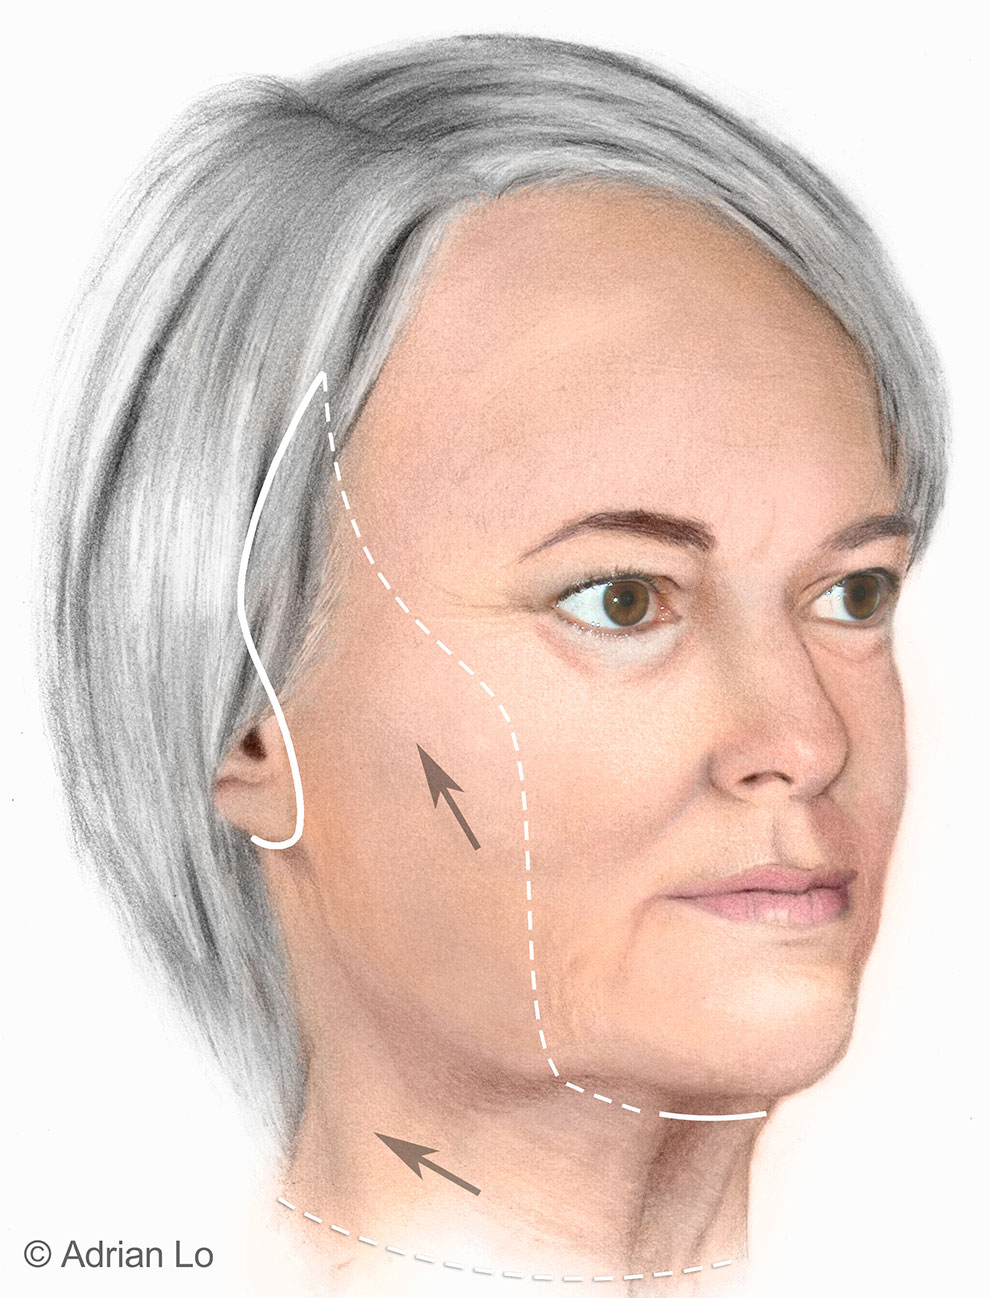 DIRECTION OF SKIN TIGHTENING DURING A FACELIFT PROCEDURE